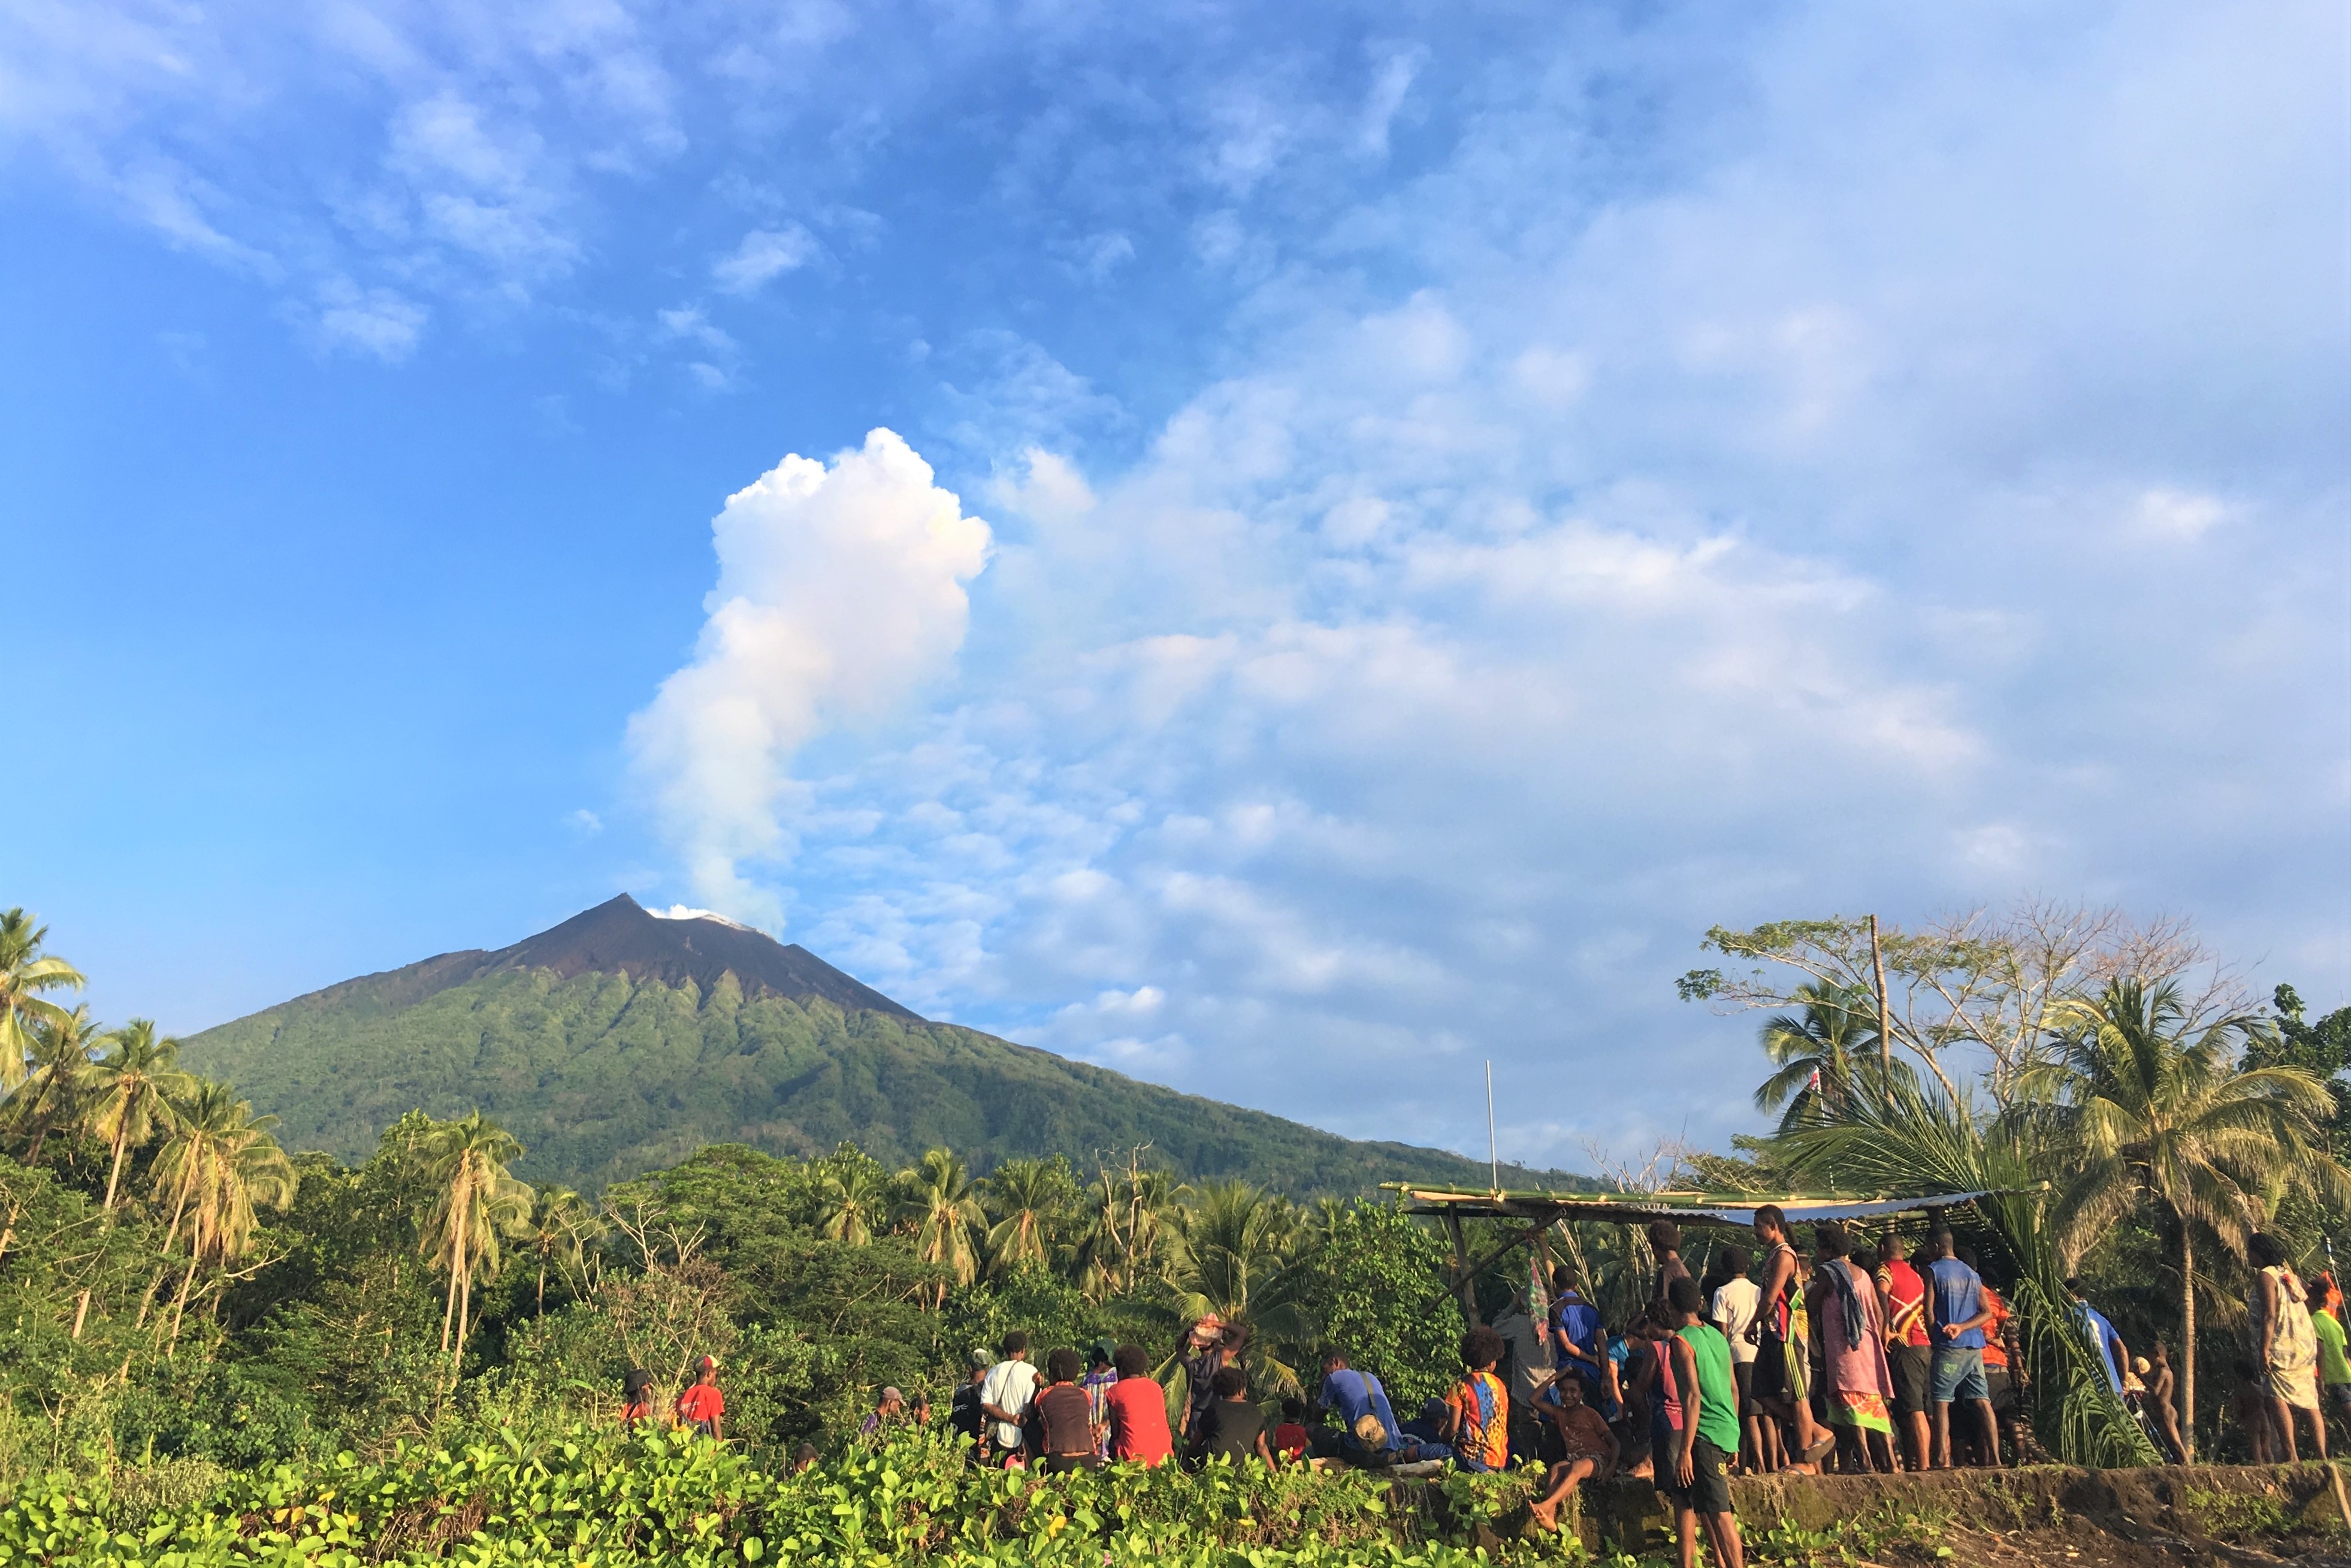 Manam islanders gathering together in the shadow of the volcano, which is showing a white gas plume against the bright blue sky; image credit Emma Liu, UCL